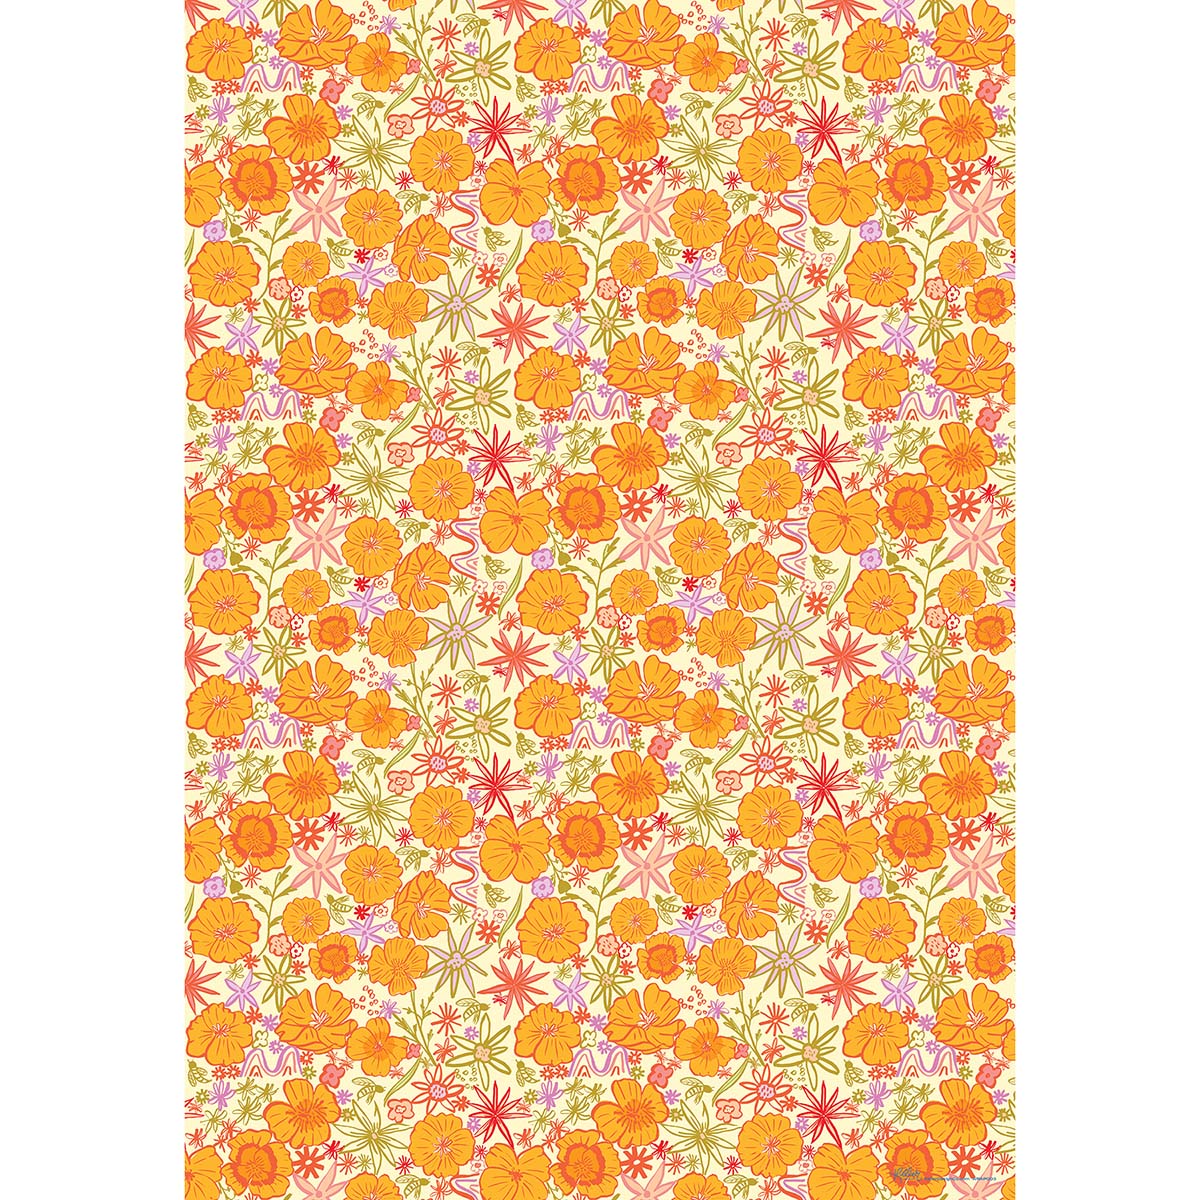 Wildflower Poppy Mix Gift Wrap-3 Sheets-Wholesale